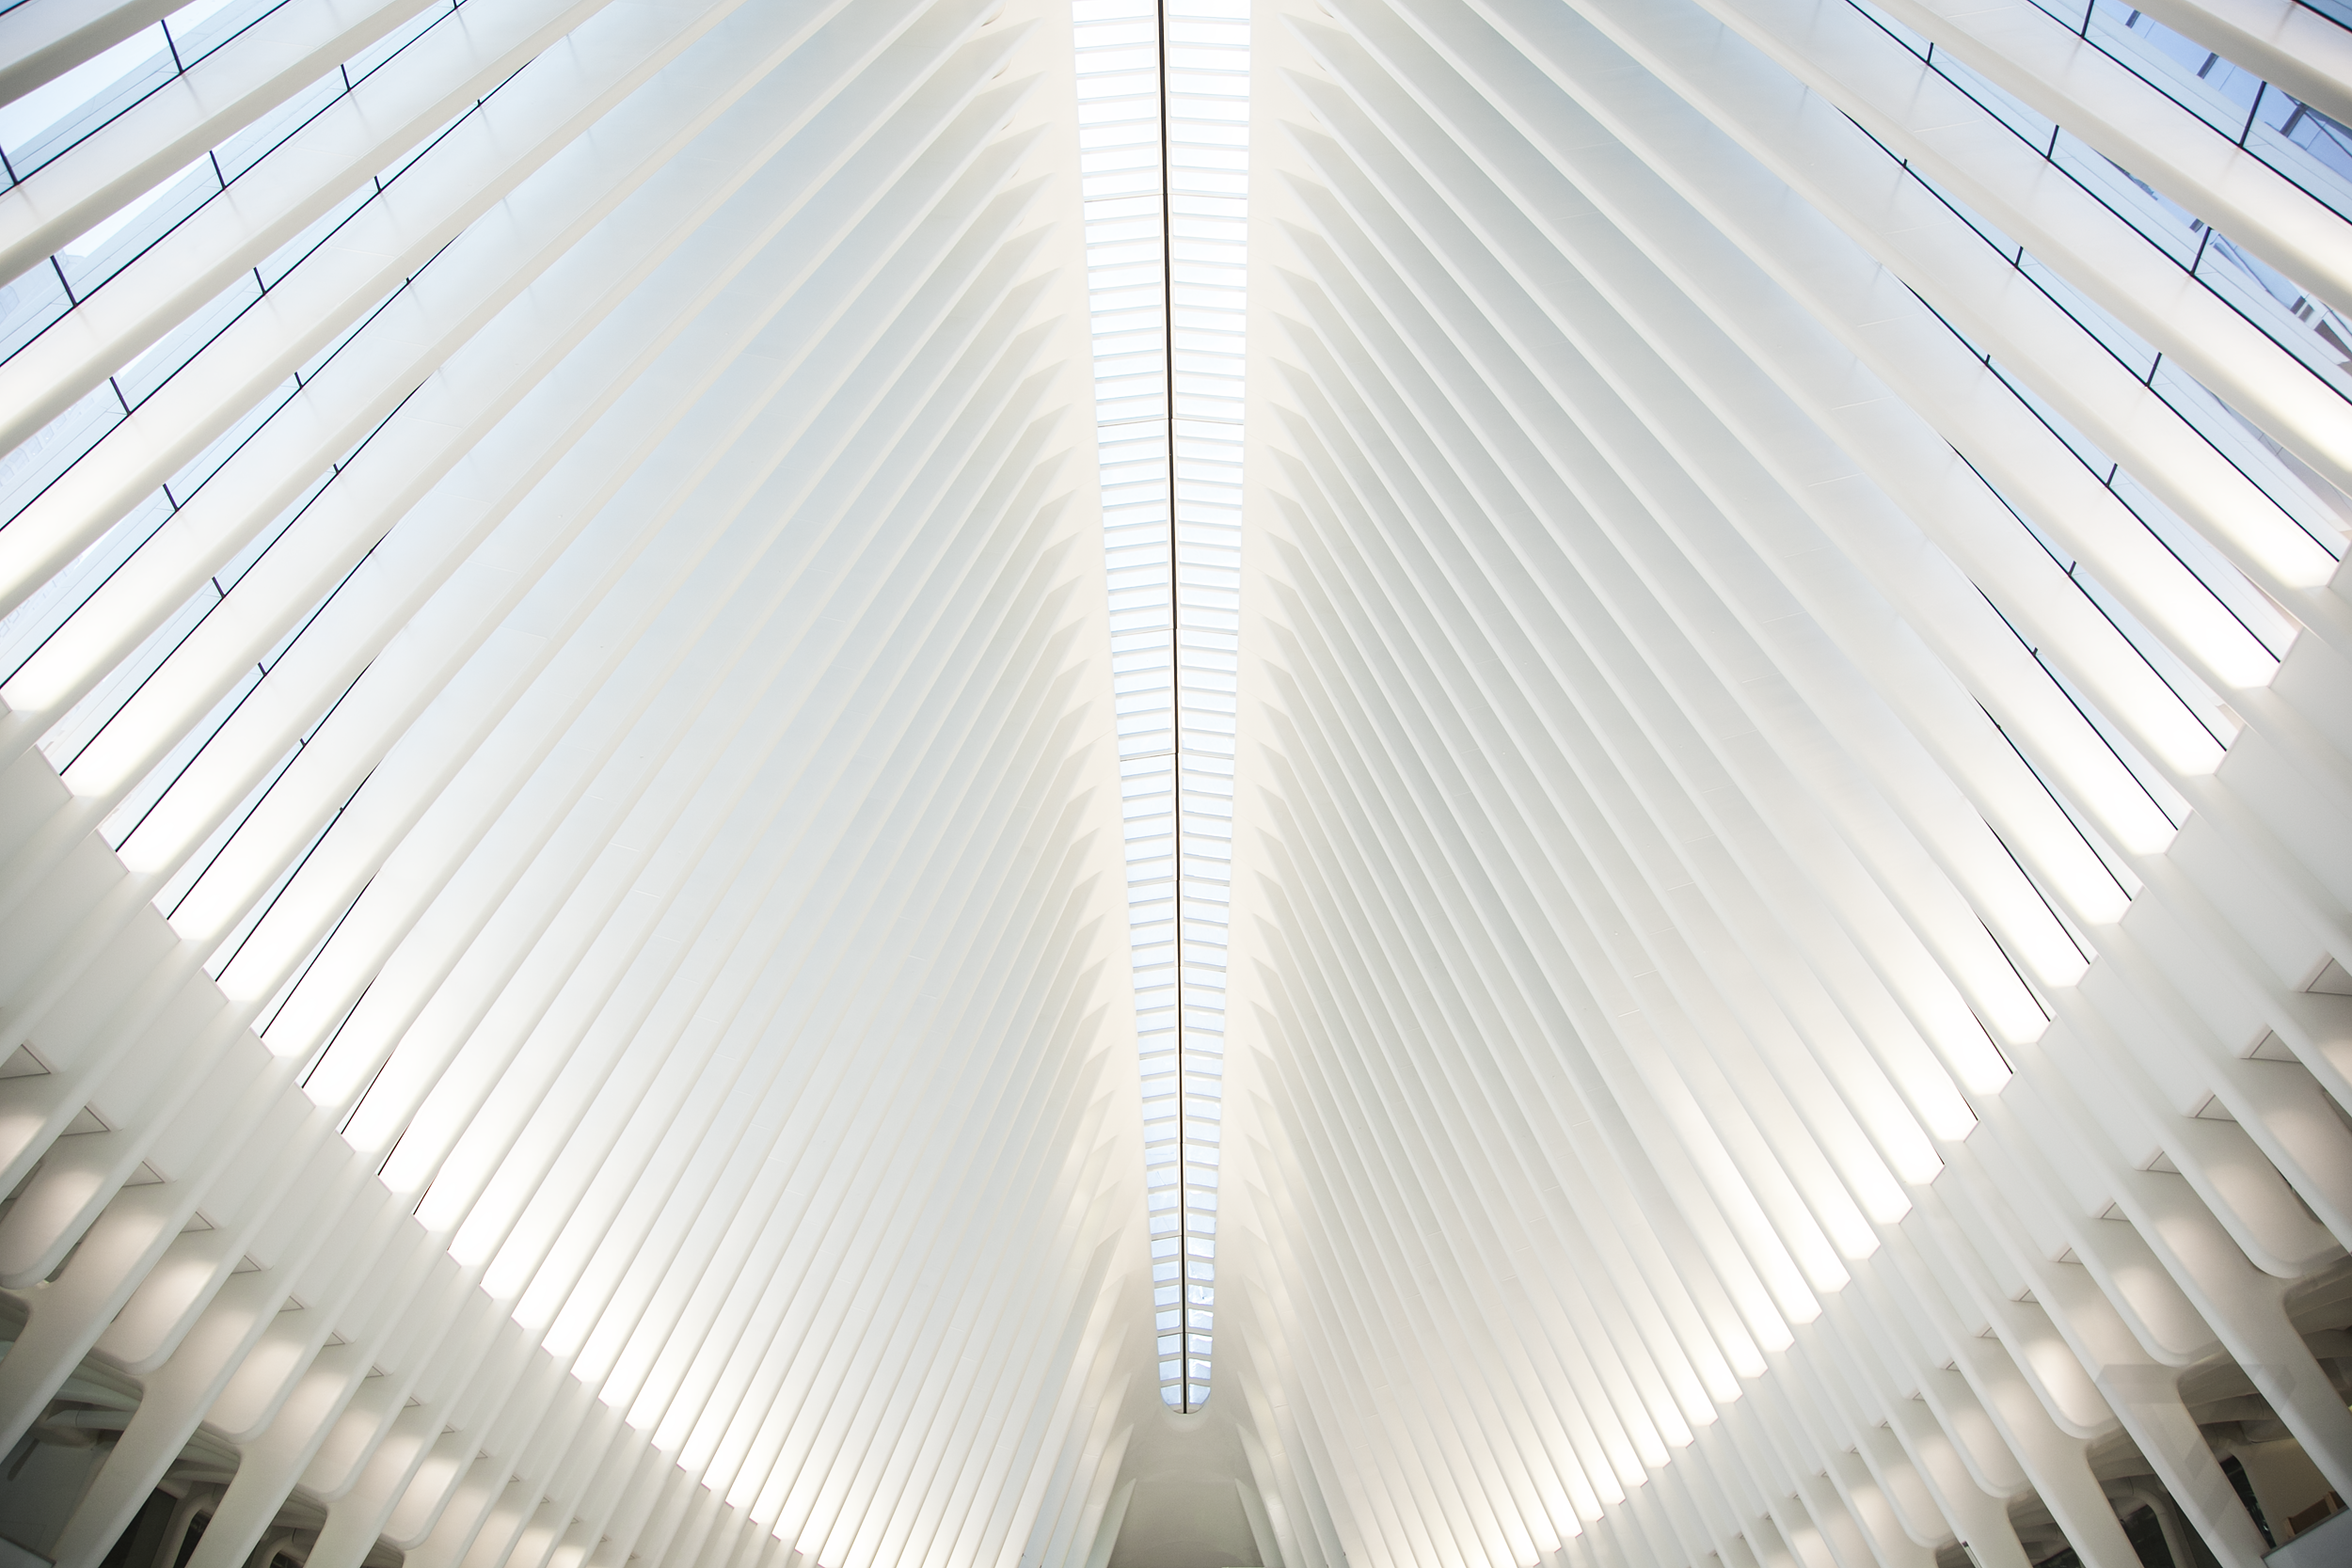 Inside the newly opened World Trade Center Transit Hubs Oculus